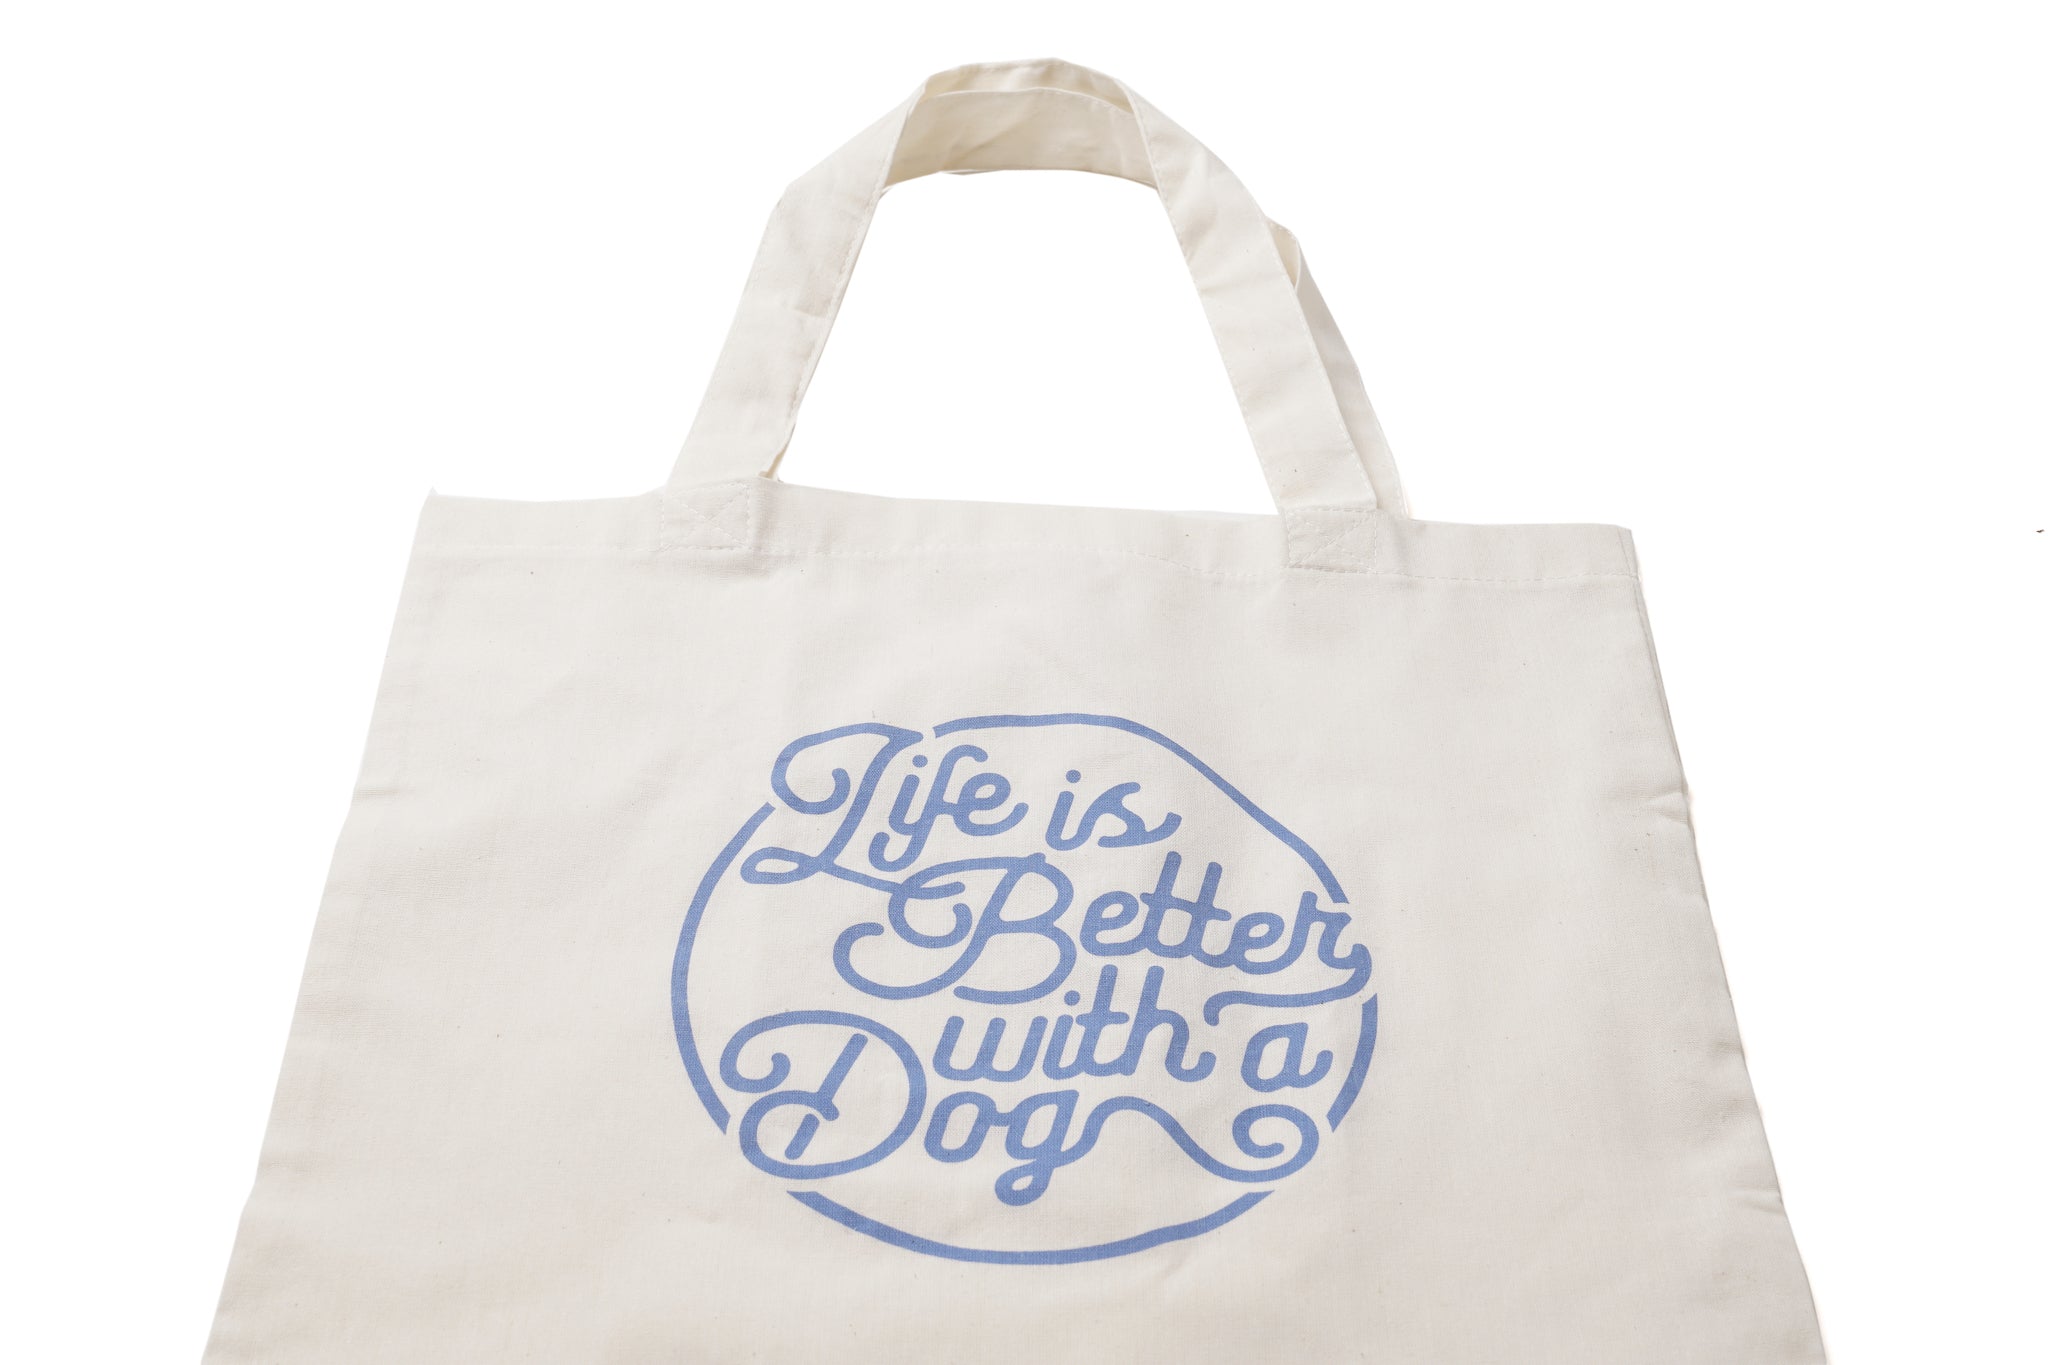 Life is Better with a Dog • Tote